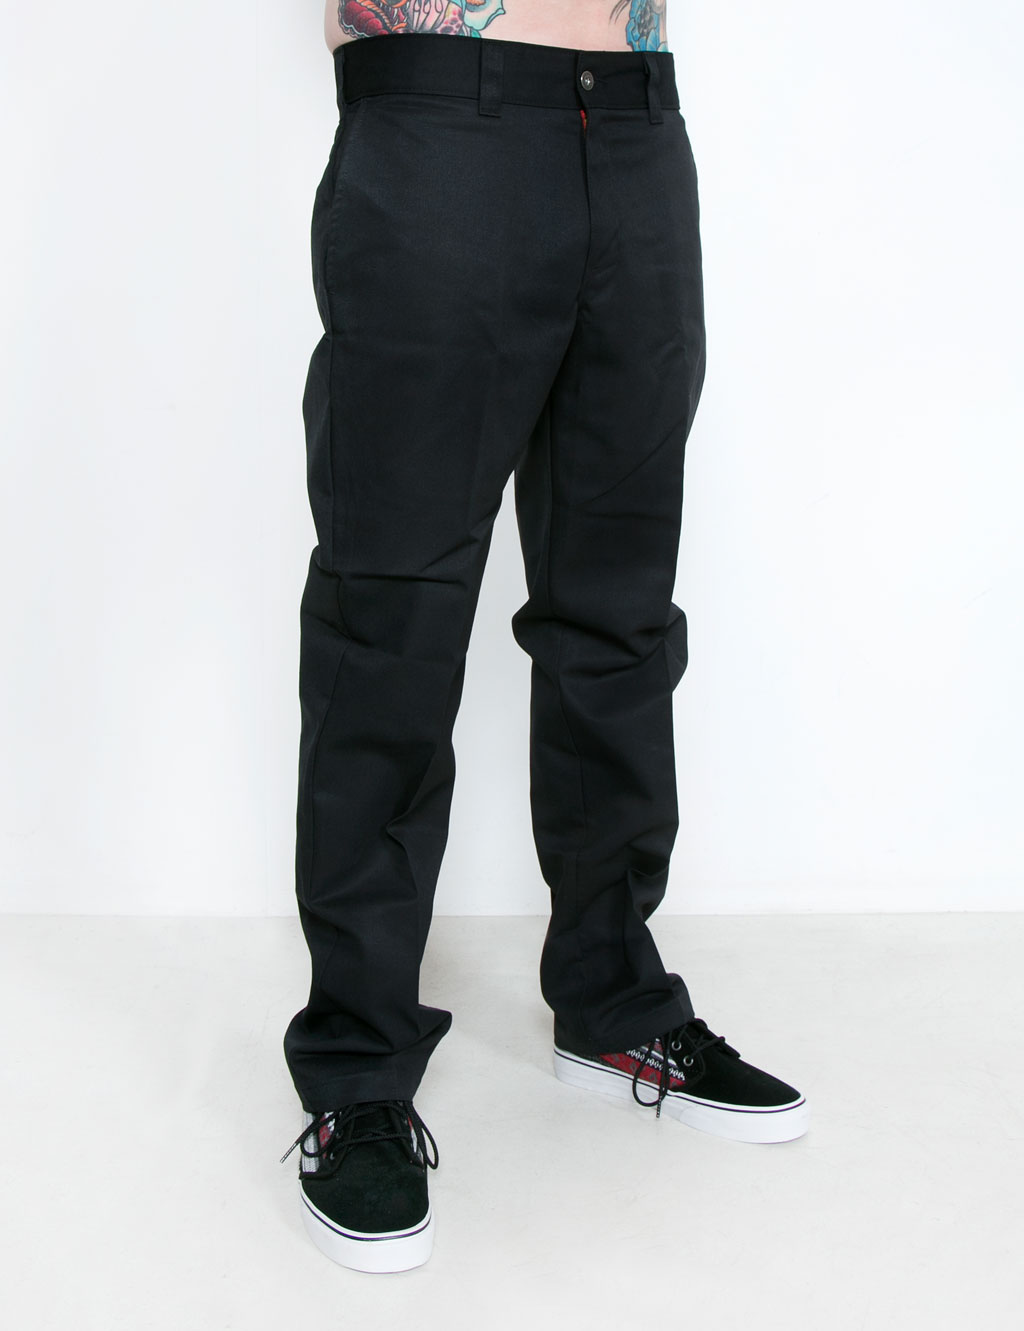 Dickies - 67 Collection Industrial Work Pant - Black